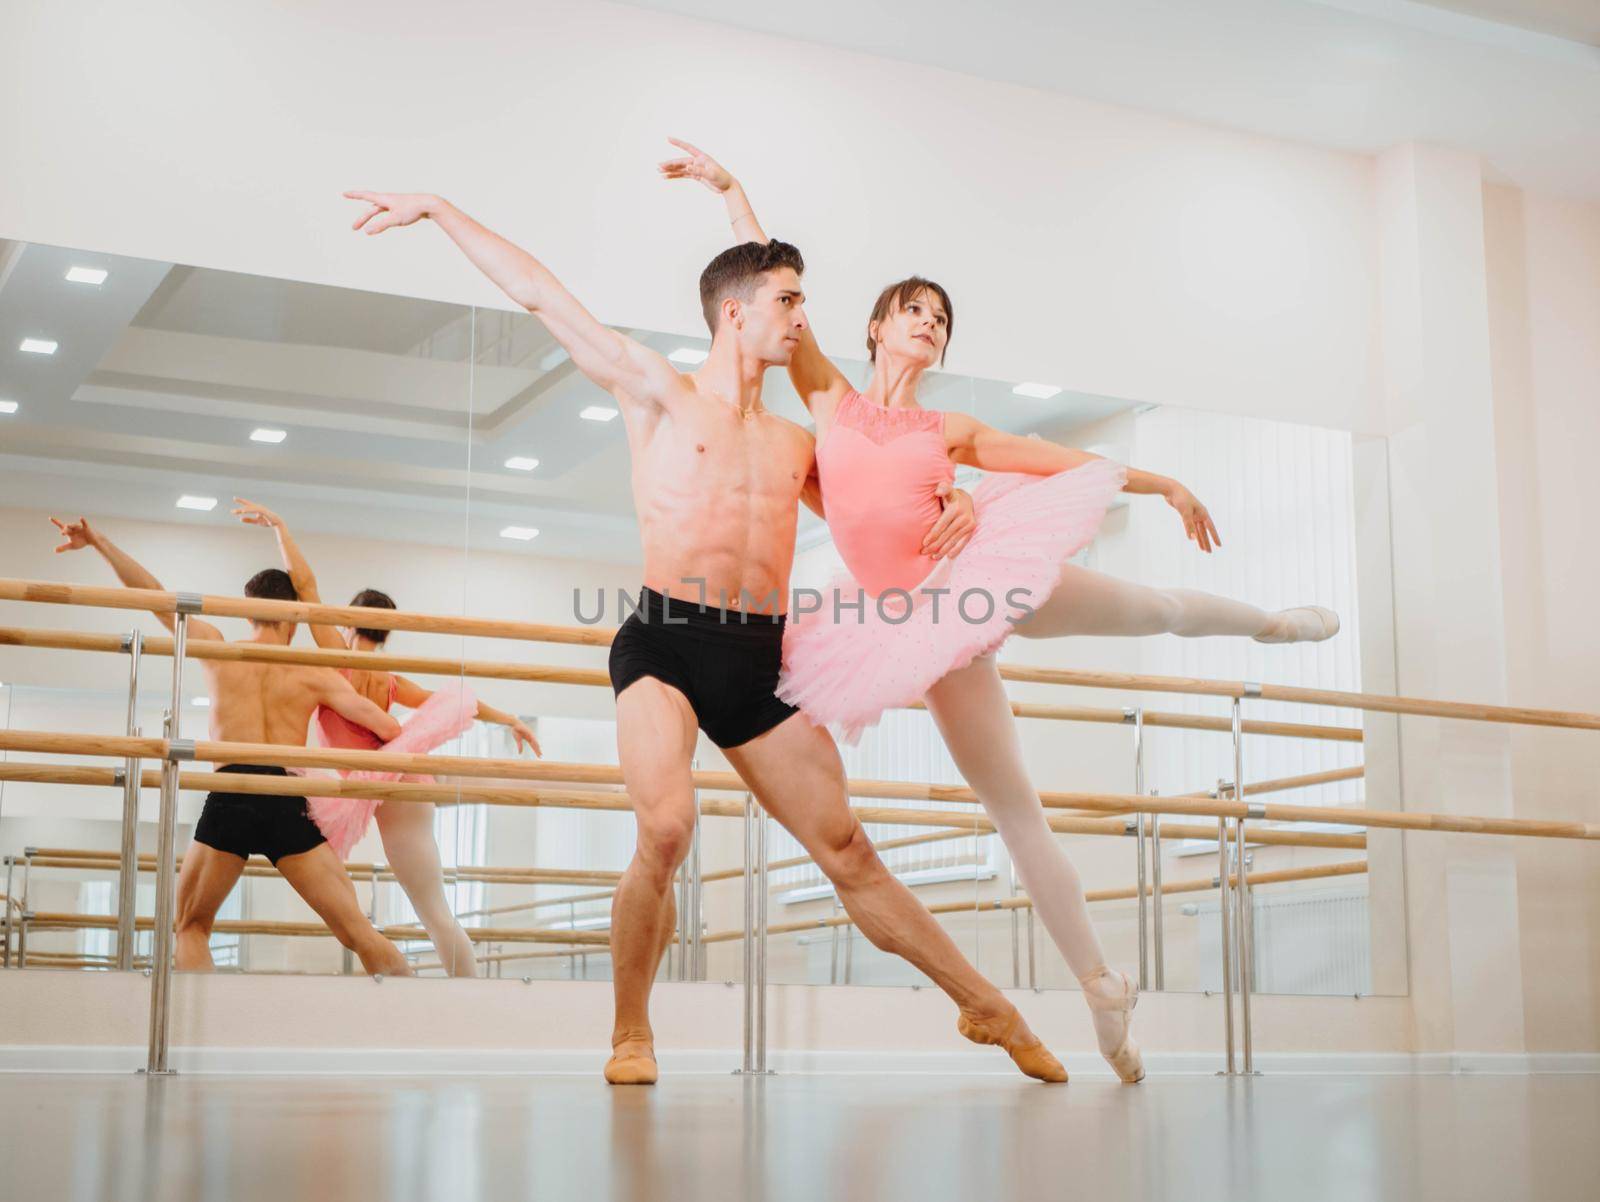 Professional, emotional ballet dancers practicing in the gym or hall with minimalism interior. Couple dancing a sensual dance before performance. by kristina_kokhanova